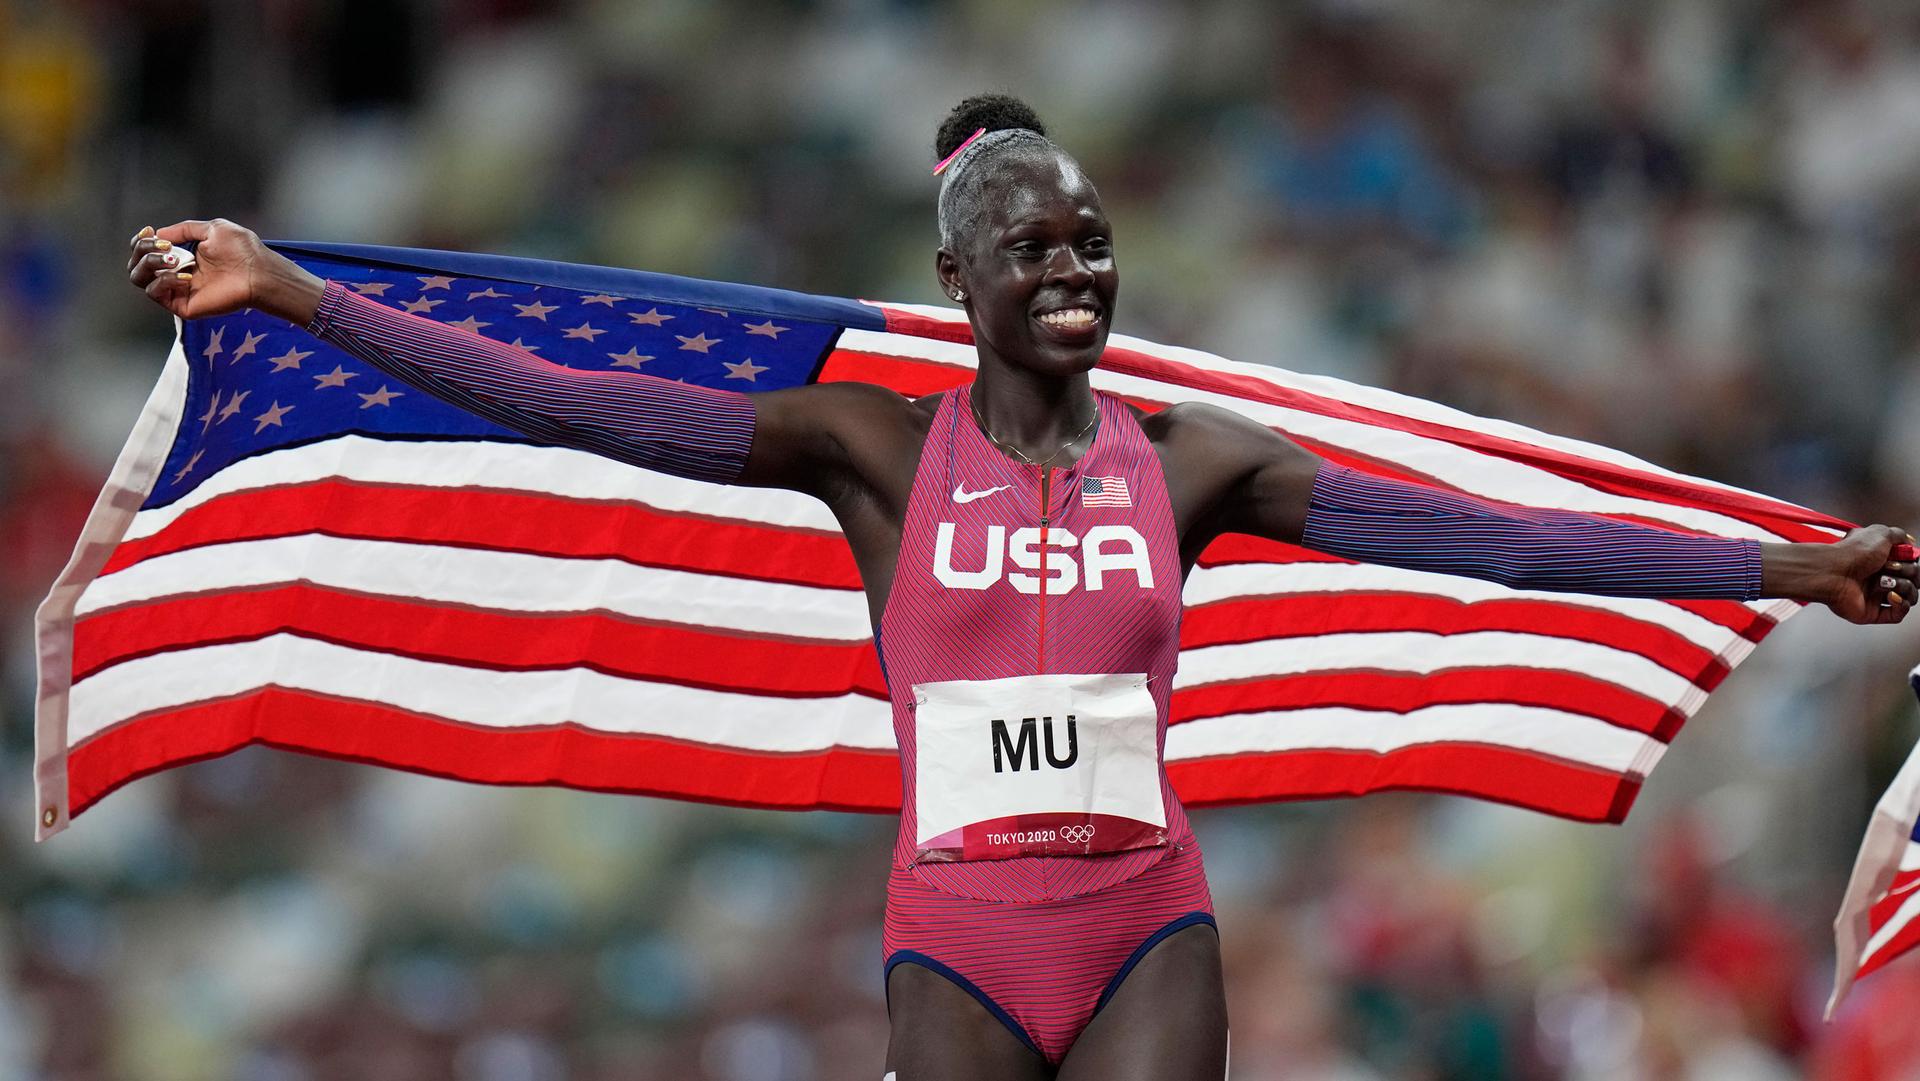 Athing Mu, of United States, reacts after winning the final of the women's 800-meters at the 2020 Summer Olympics, Tuesday, Aug. 3, 2021, in Tokyo. 